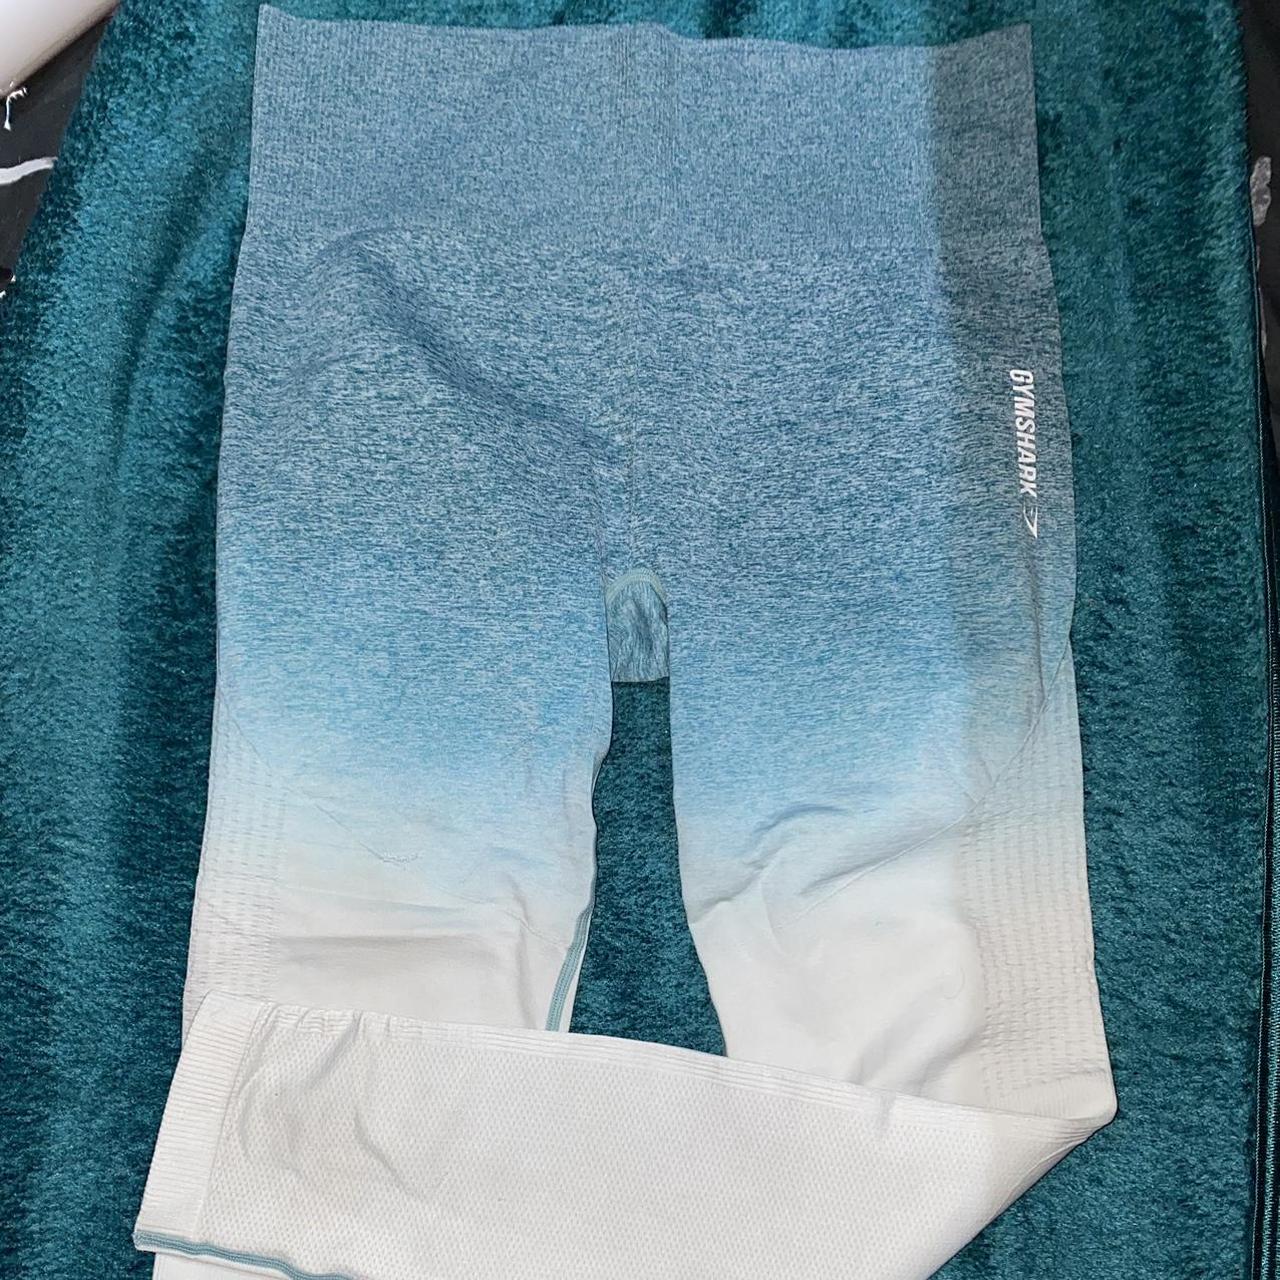 Teal and white ombre gymshark leggings, they've been - Depop